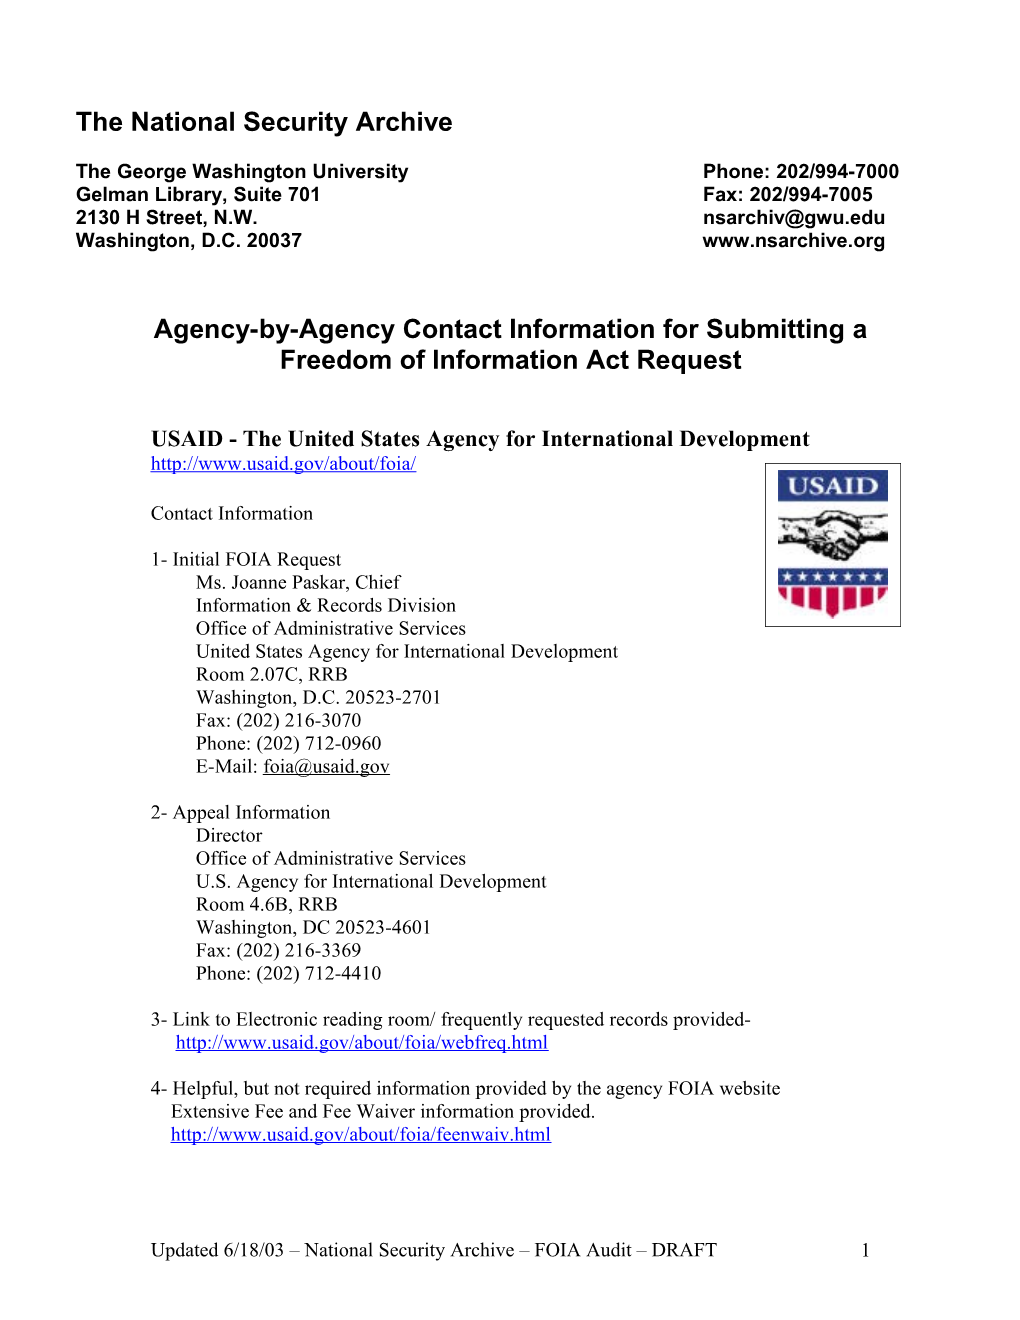 Agency-By-Agency Useful Information for Submitting a Freedom of Information Act Request